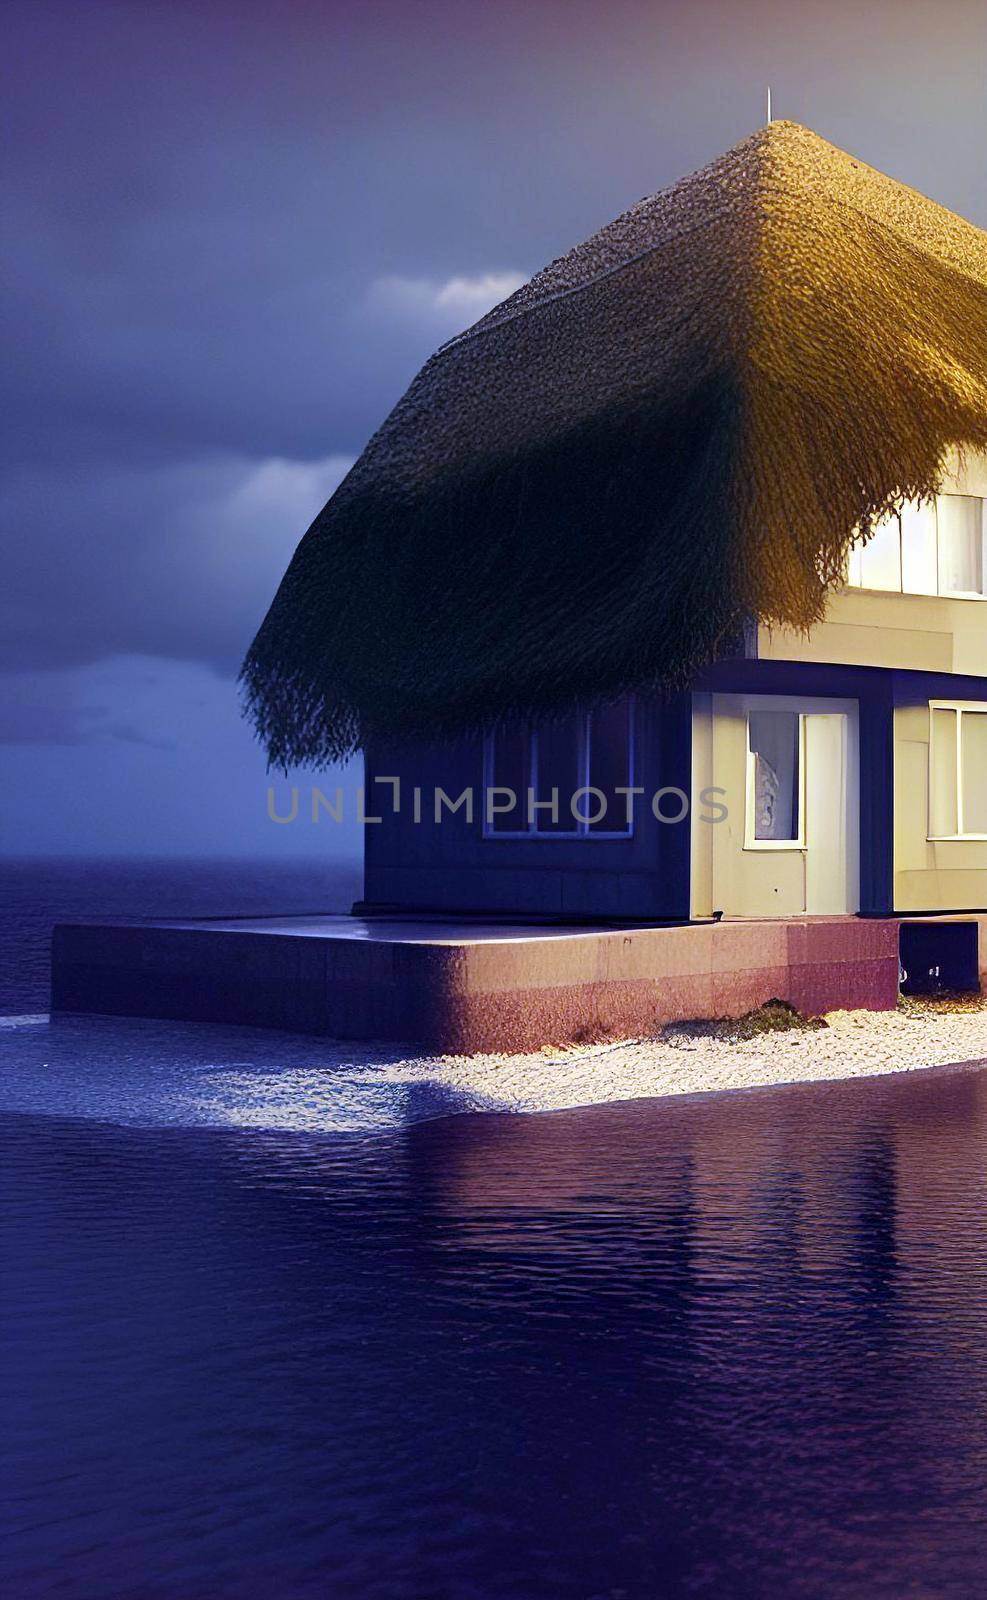 Magic Dreamy House in Nature. Fantastic Dreamhouse Illustration. High quality photo